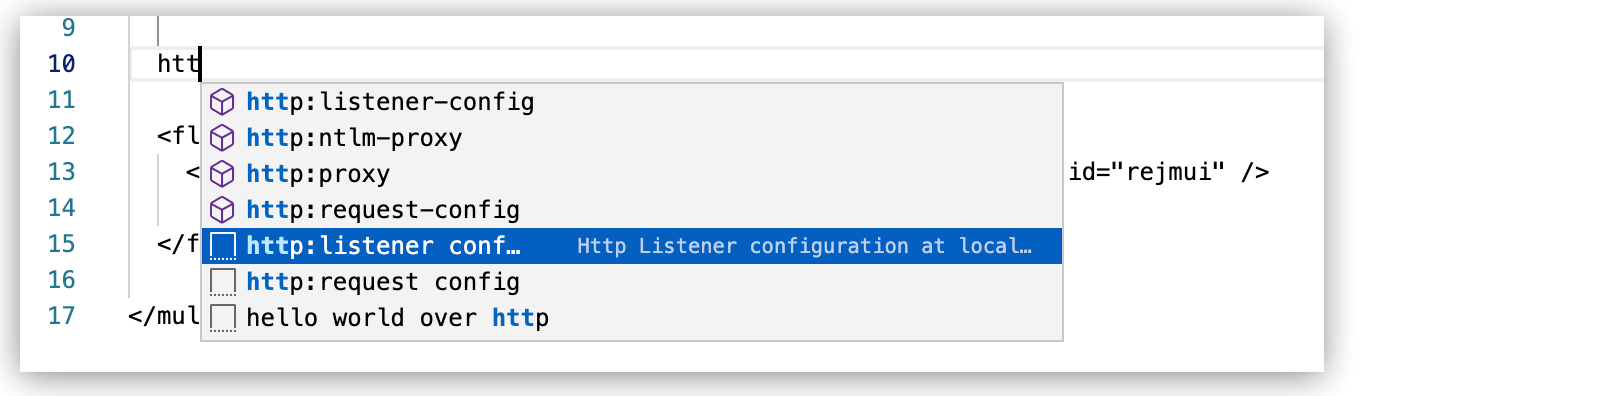 http:listener-config highlighted in the configuration XML menu